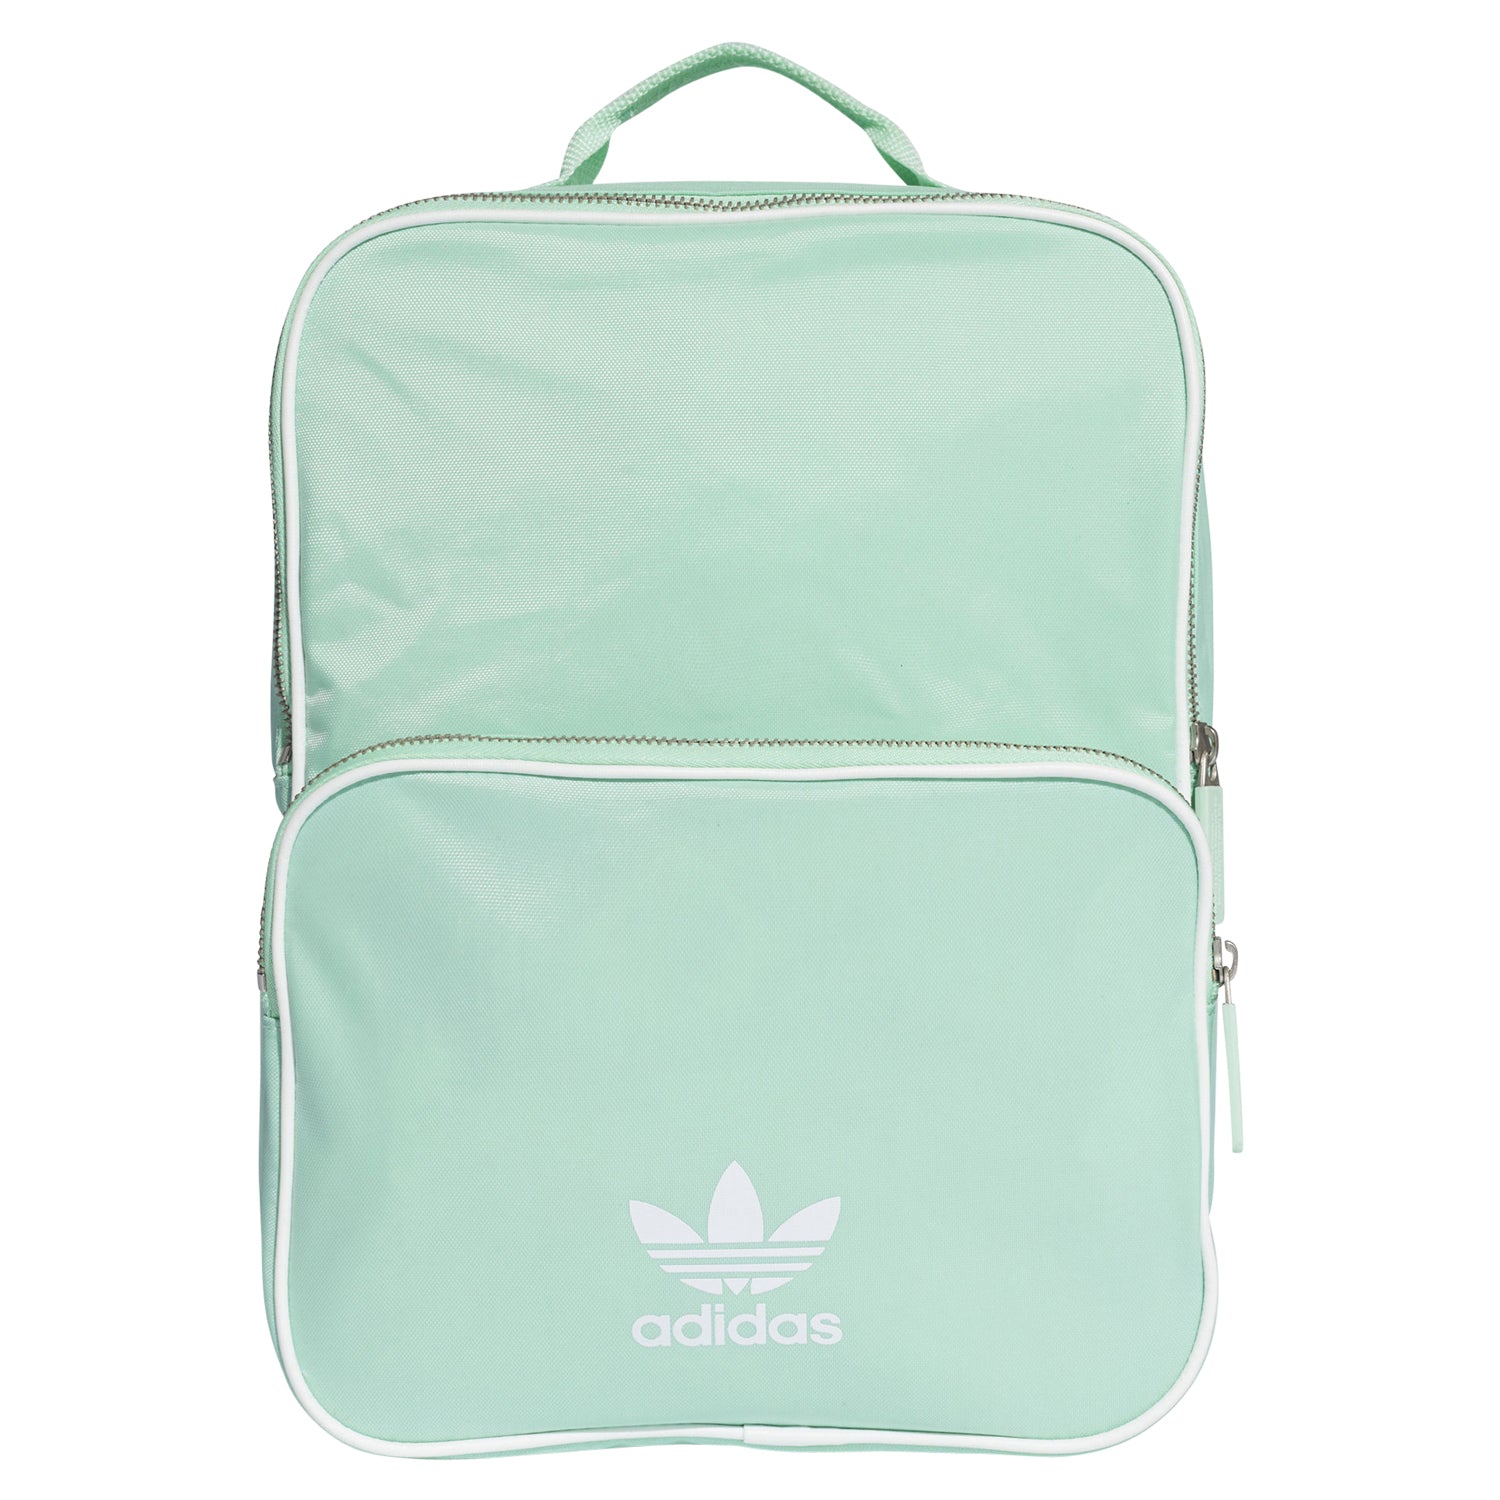 adidas small pouch bag